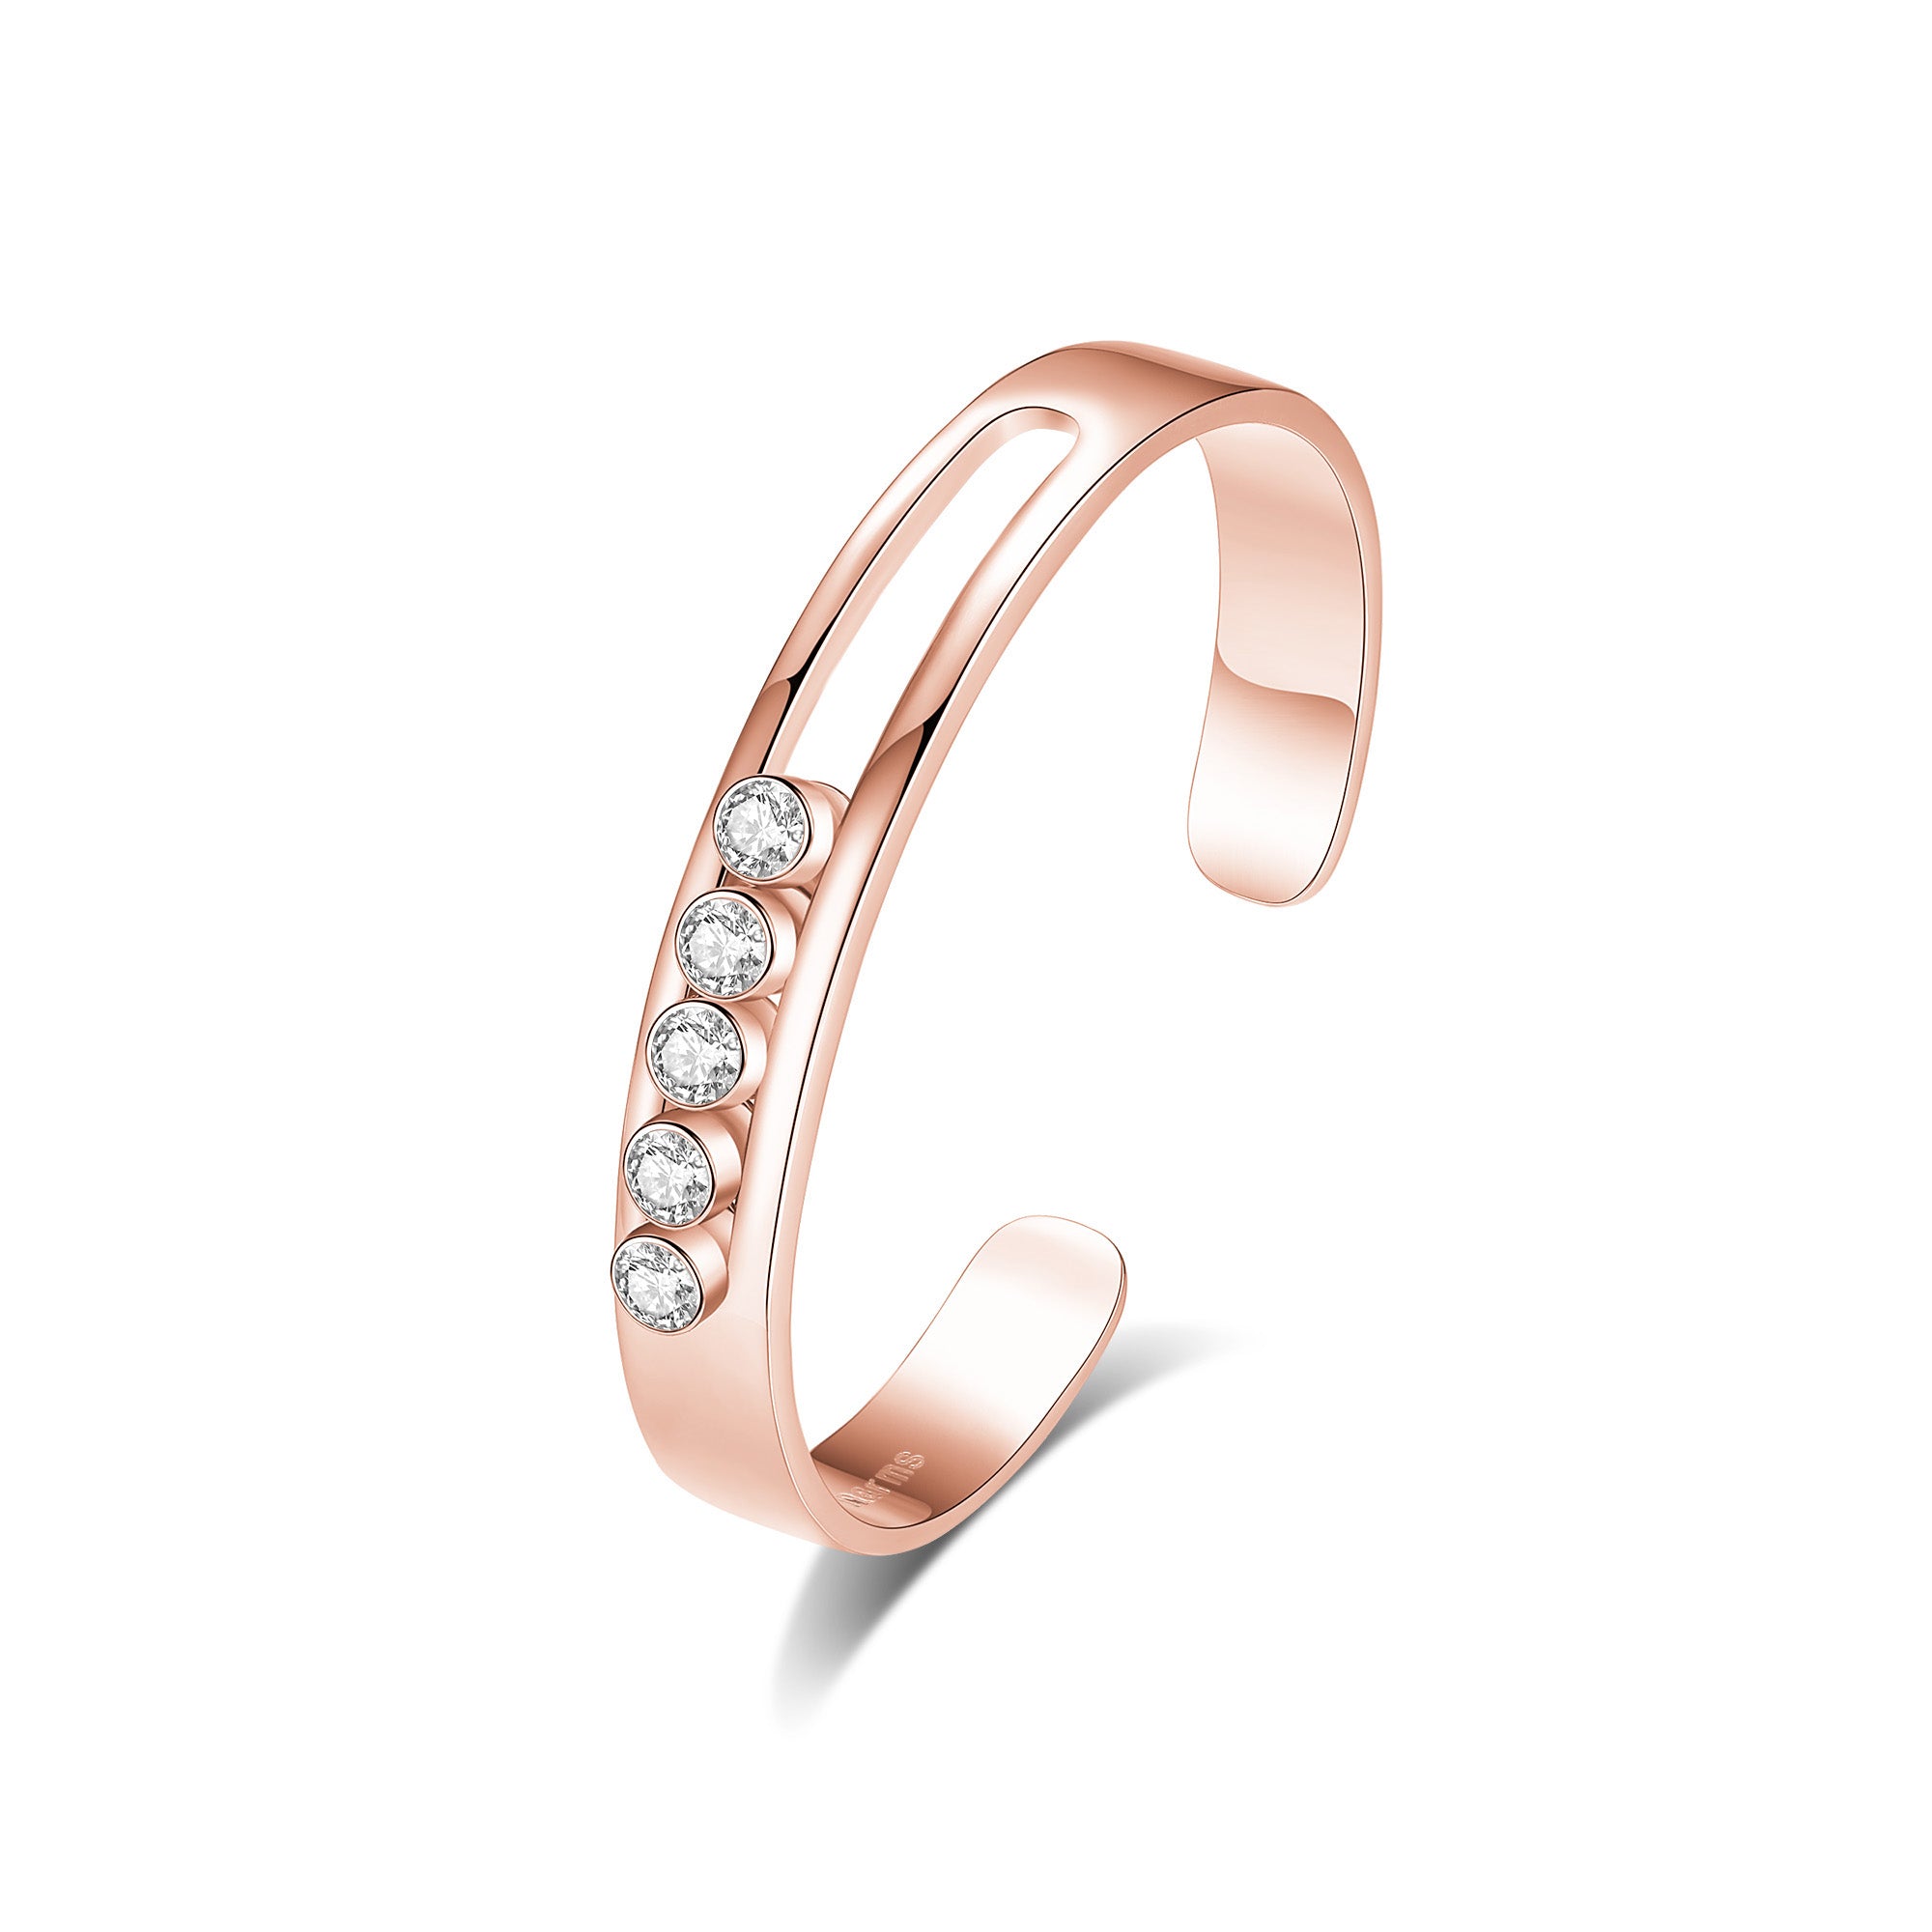 Classicharms Audrey Rose Gold Twinkle Clear Zirconia Bangle Bracelet